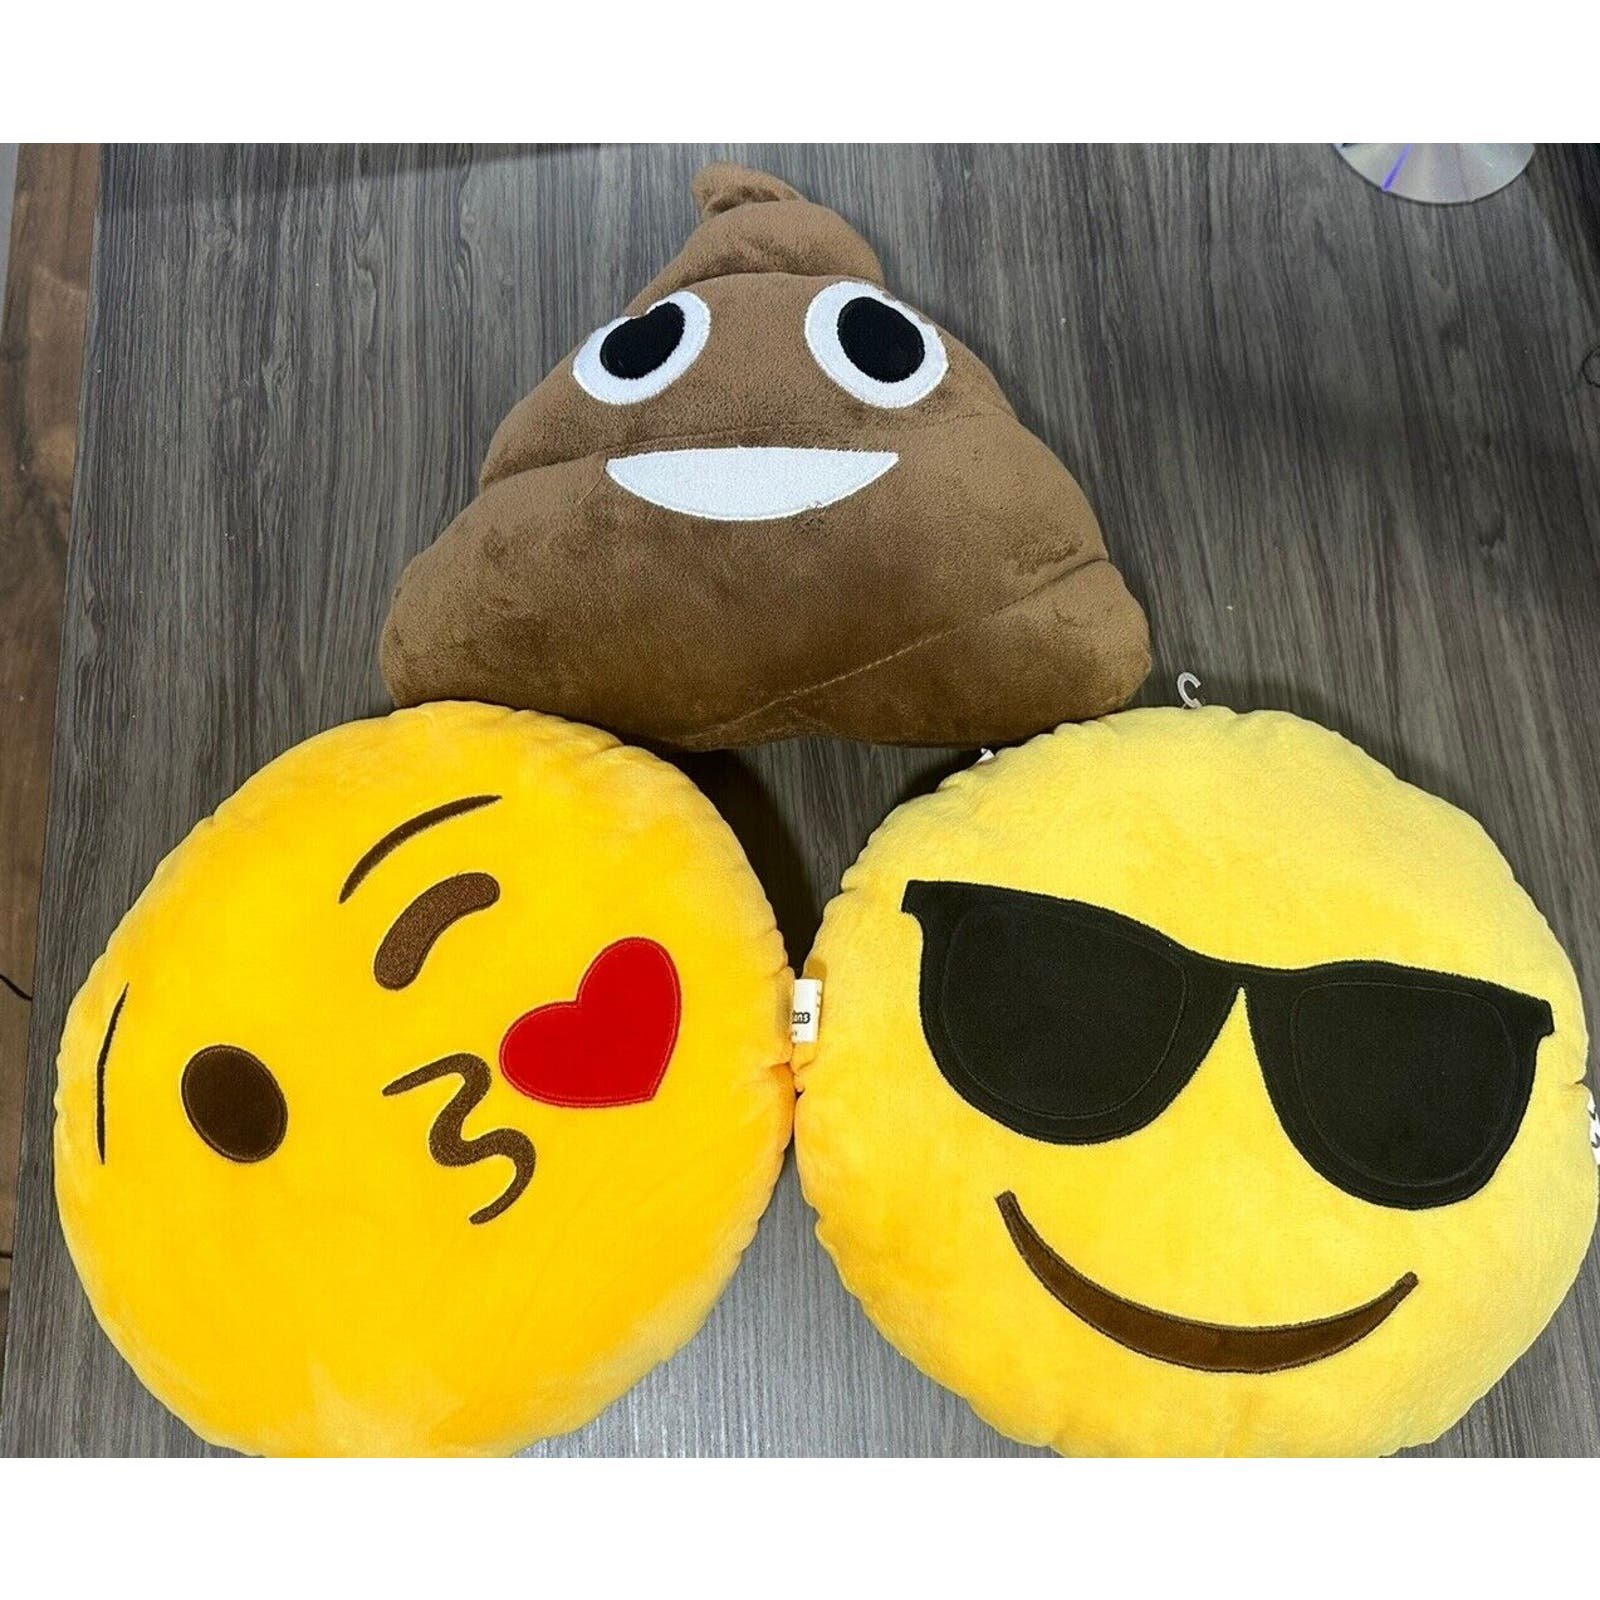 Pillow EMOJI PILLOWS lot of 3 great condition Poop+kiss